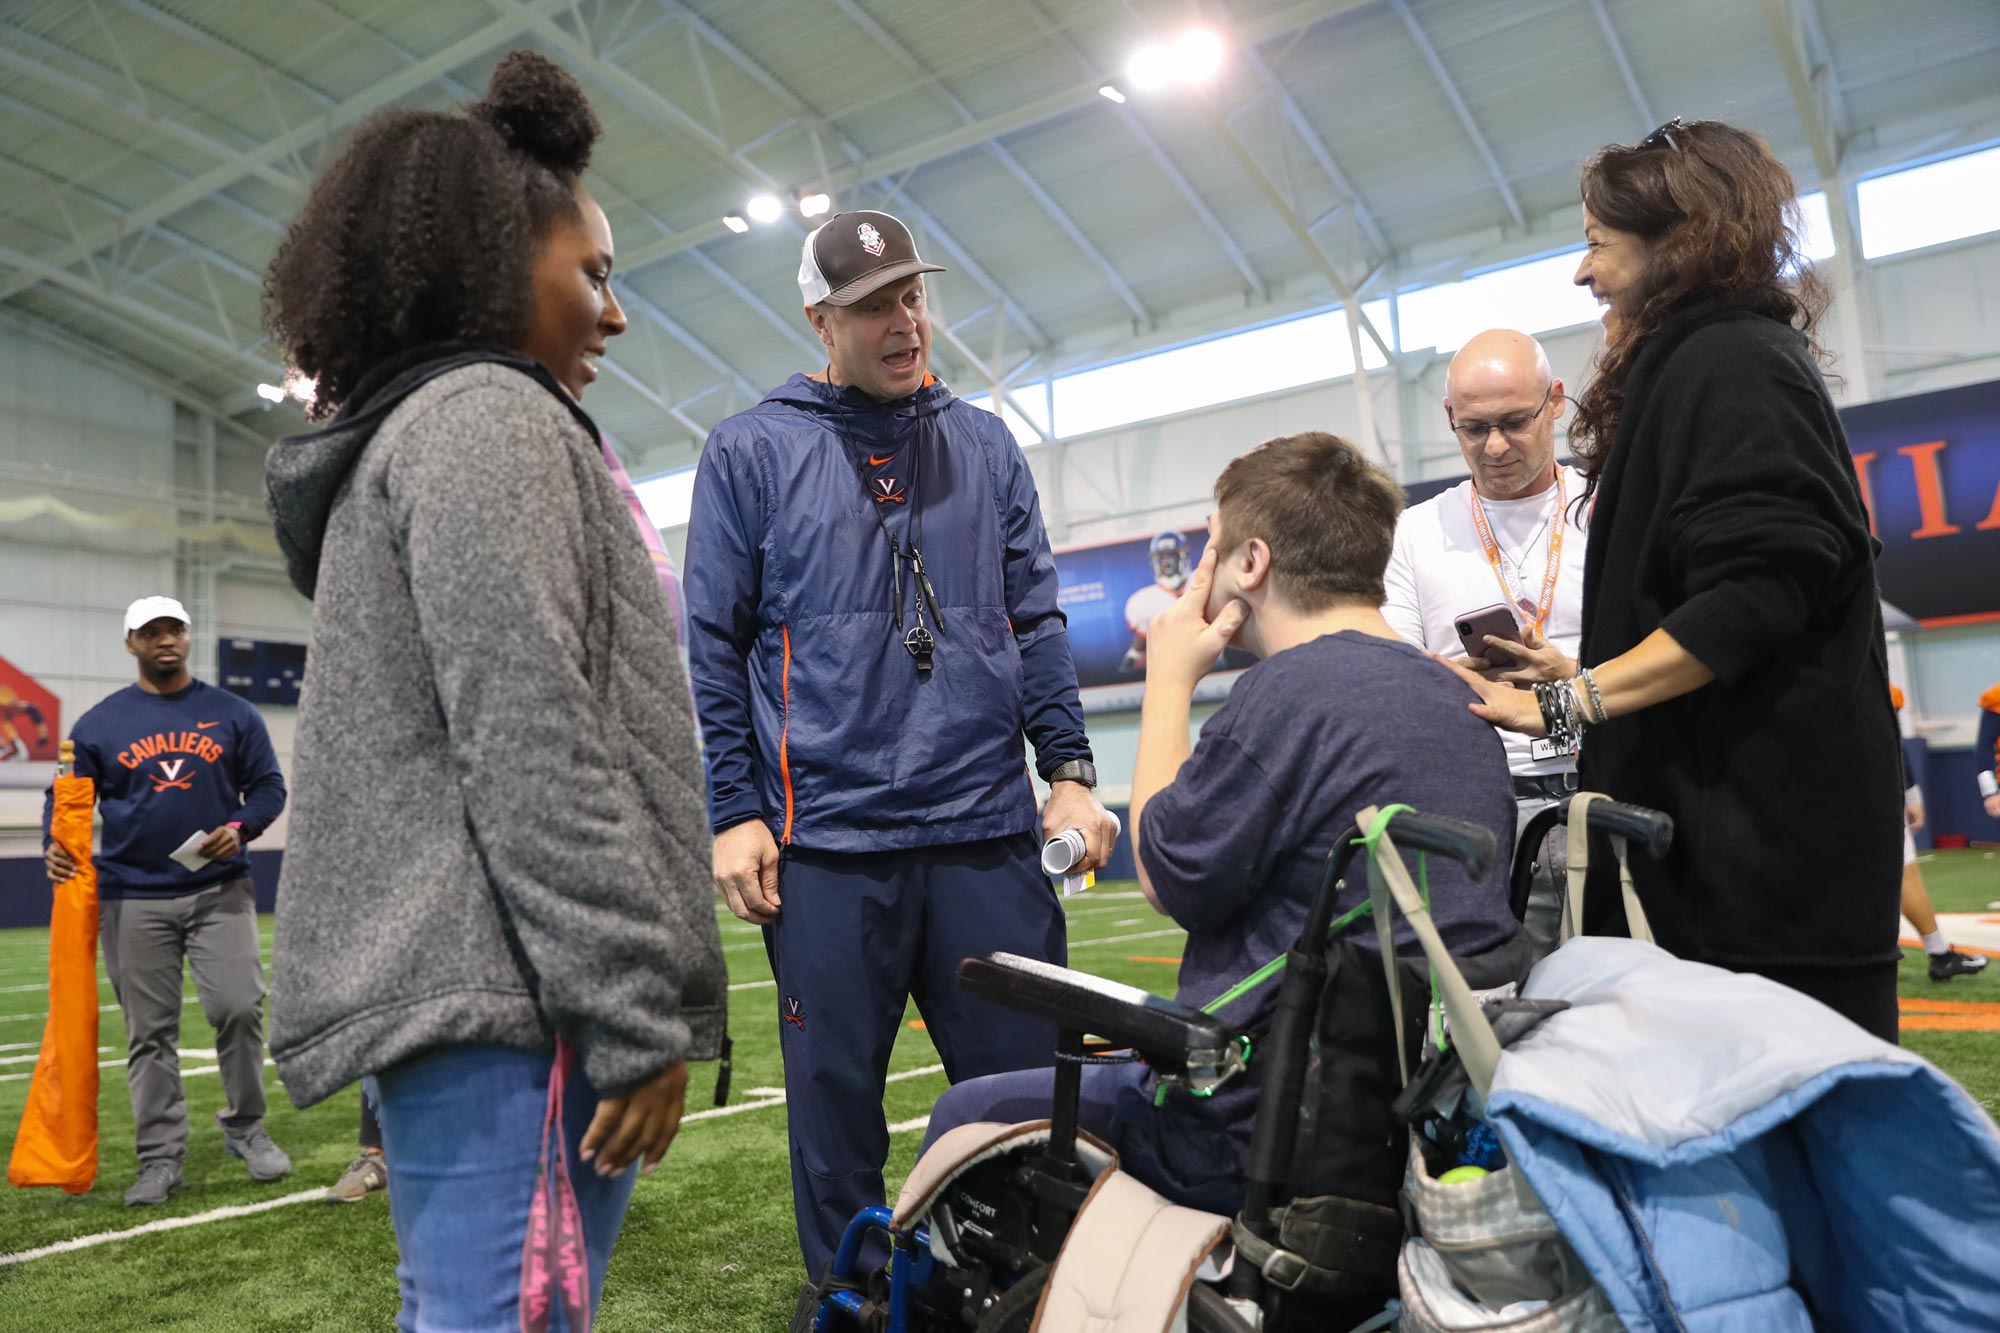 Bronco Mendenhall, speaks to a child and his family on the indoor practice field